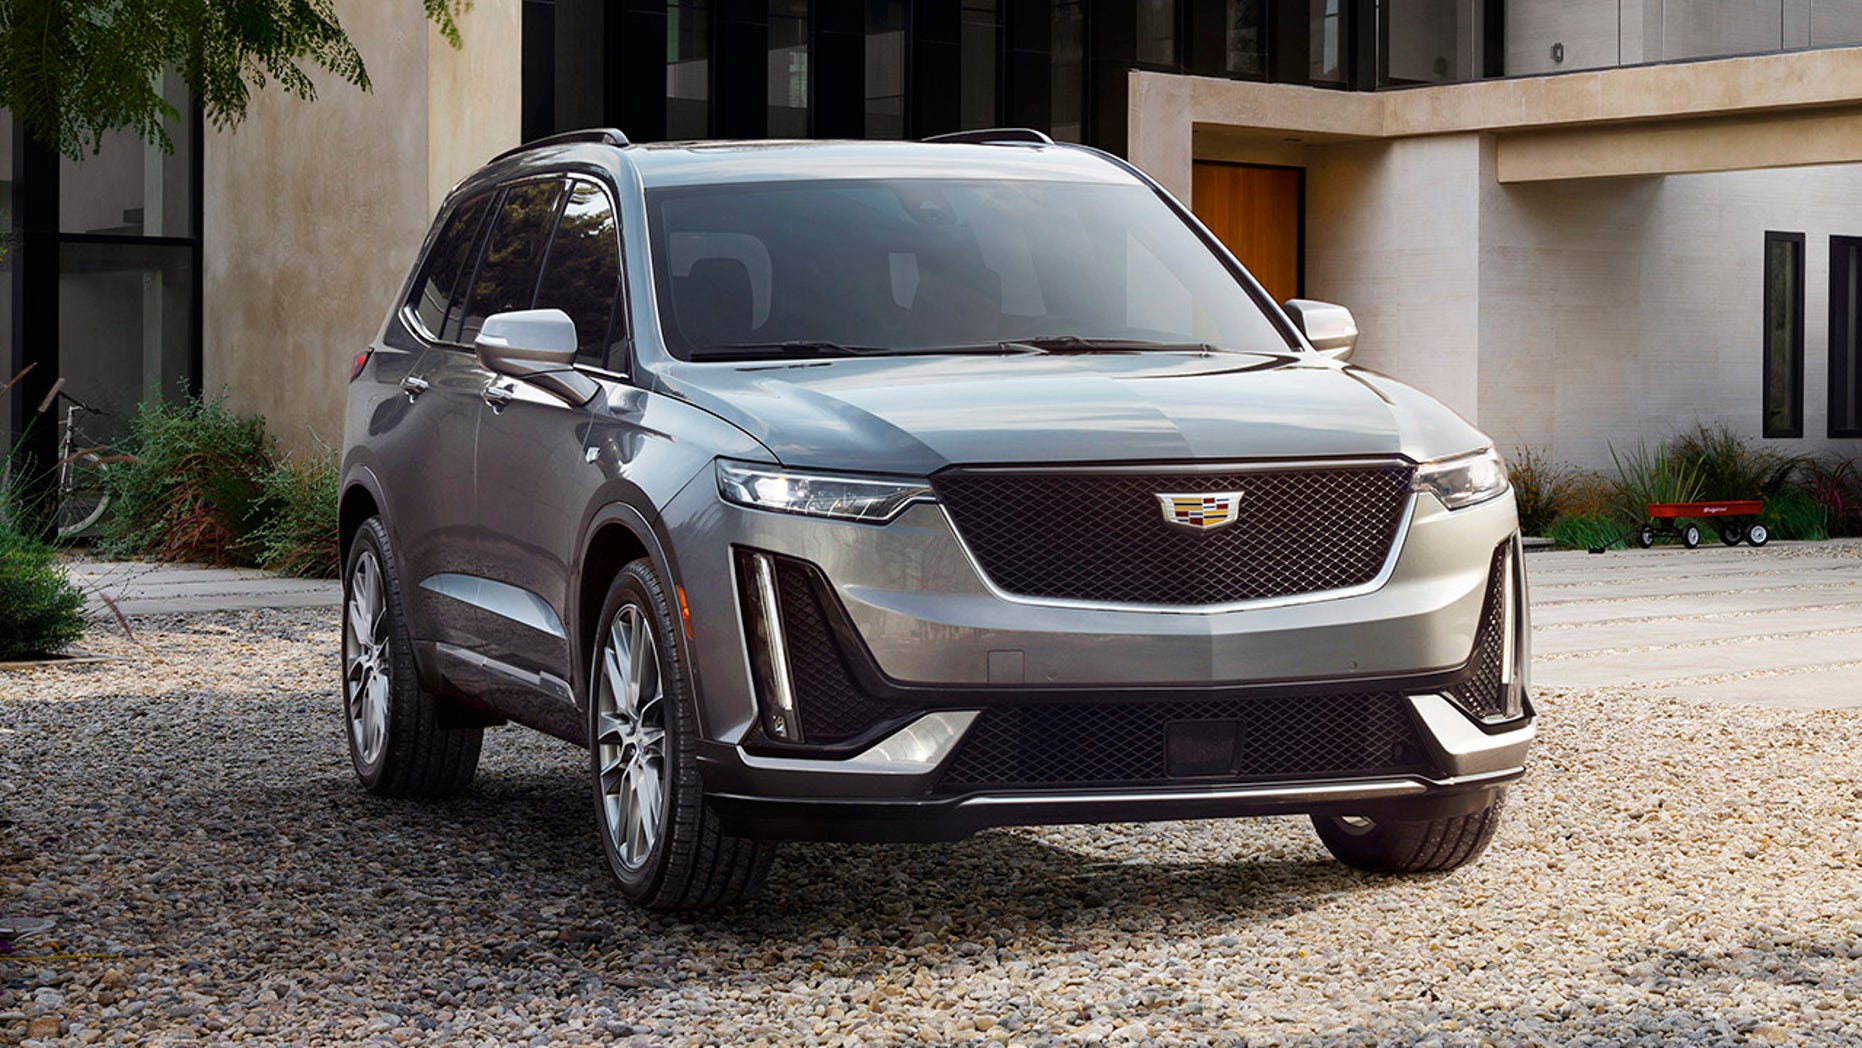 The 2020 Cadillac XT6 is the brand